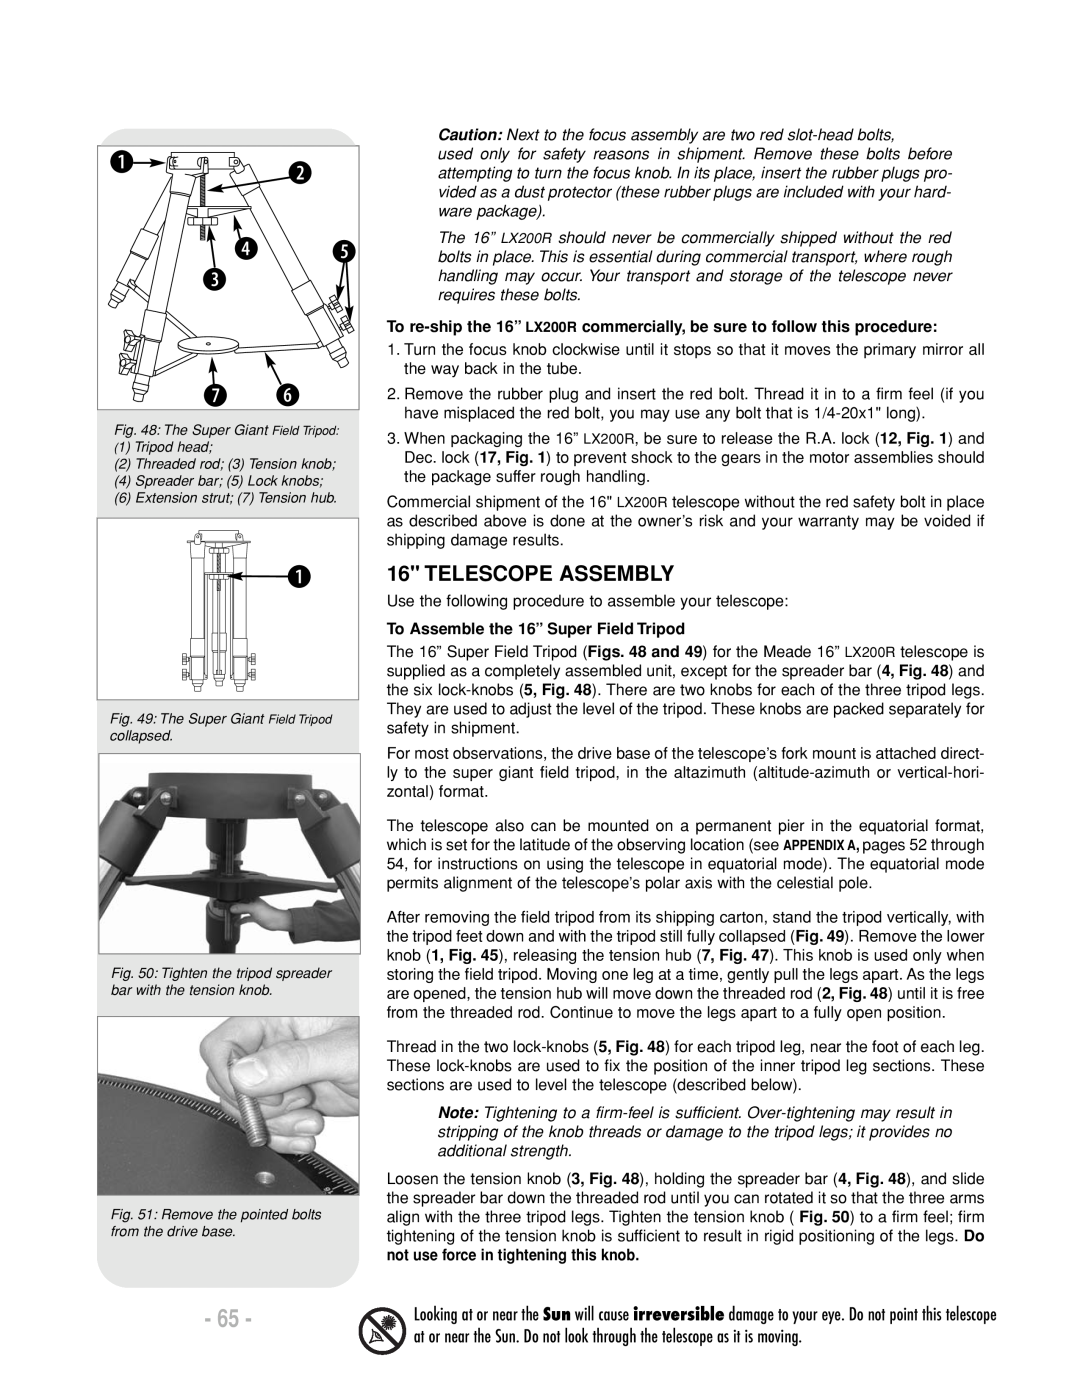 Meade LX200 R instruction manual Telescope Assembly, To Assemble the 16” Super Field Tripod 